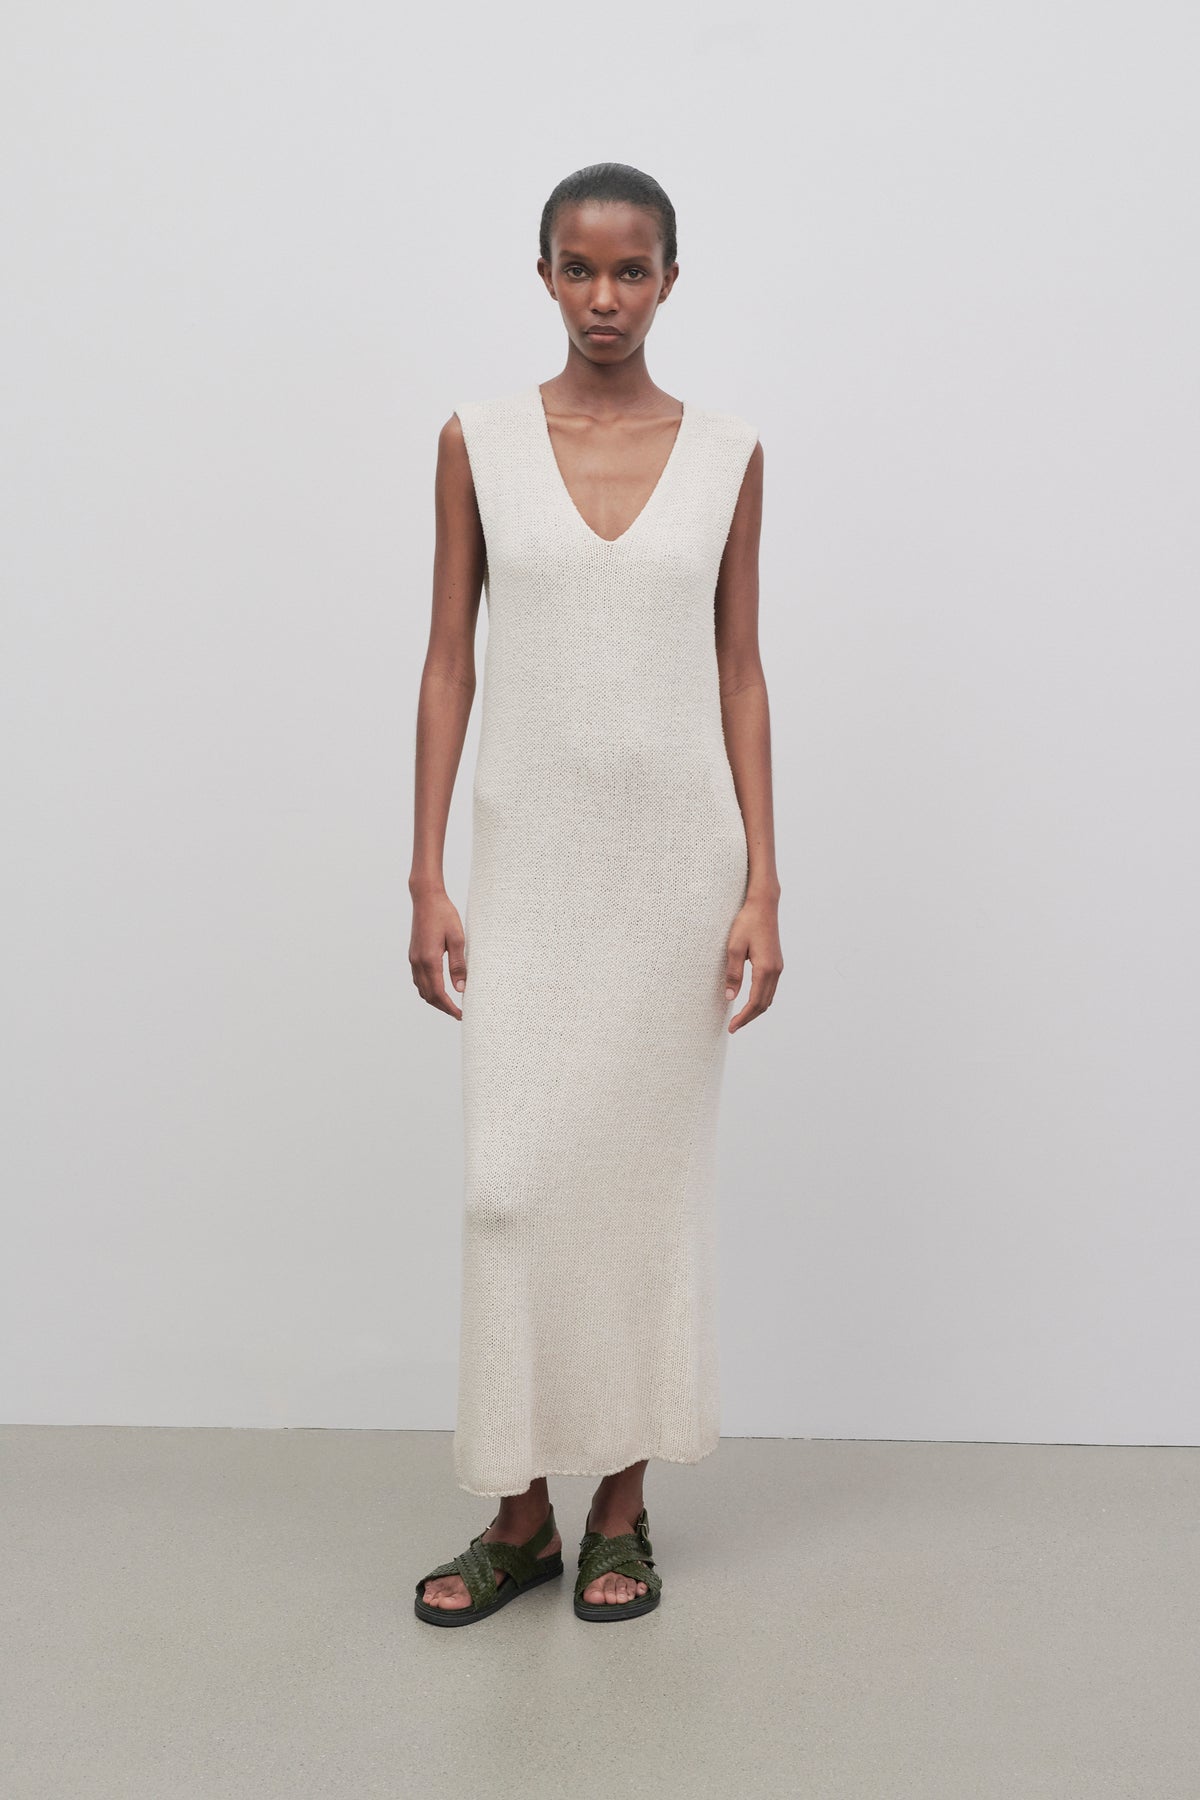 White silk dress from the row clothing line 